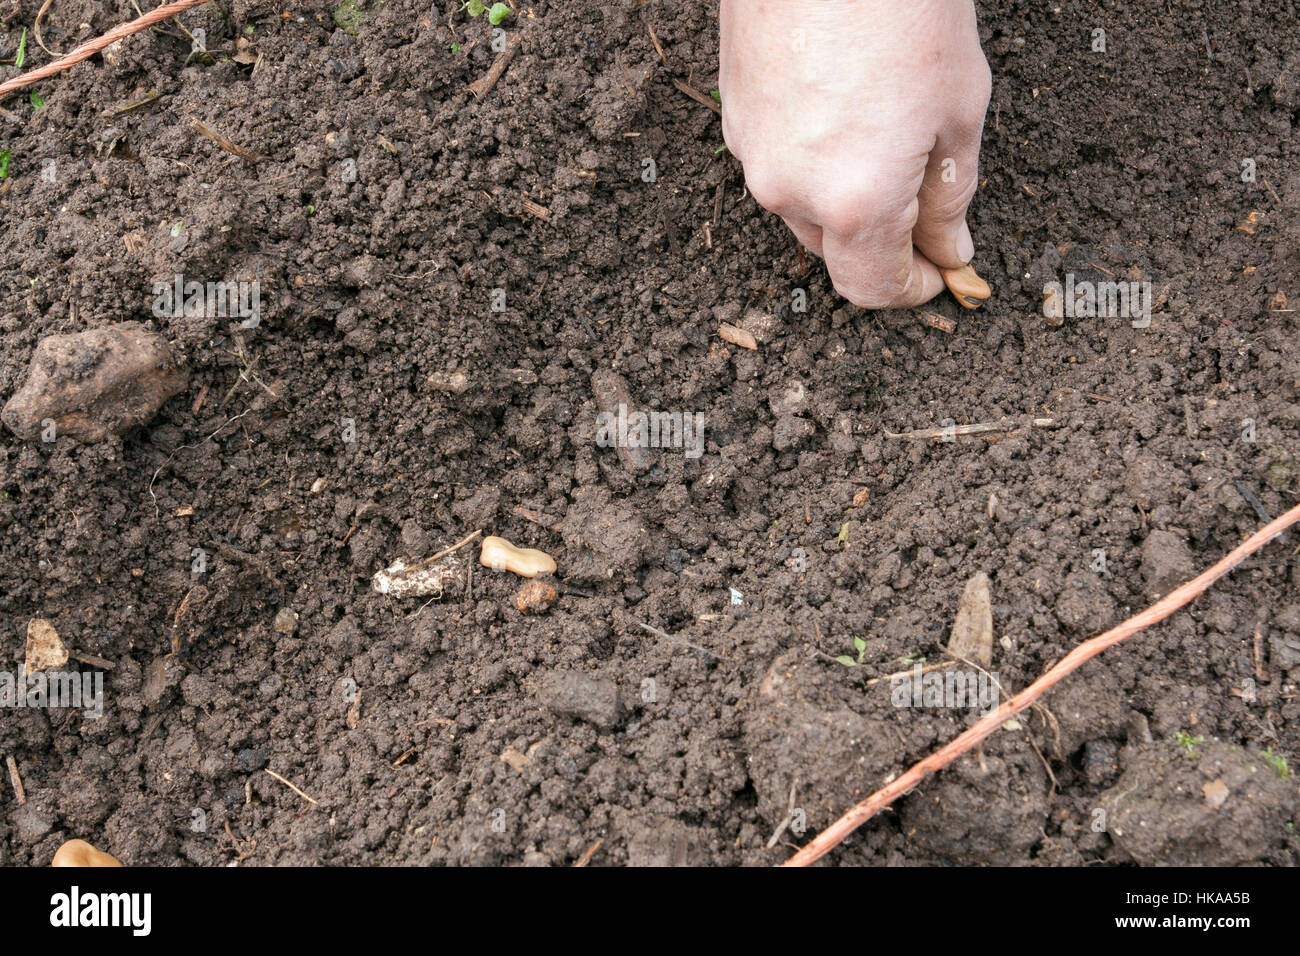 Sowing broad beans outside. Stock Photo